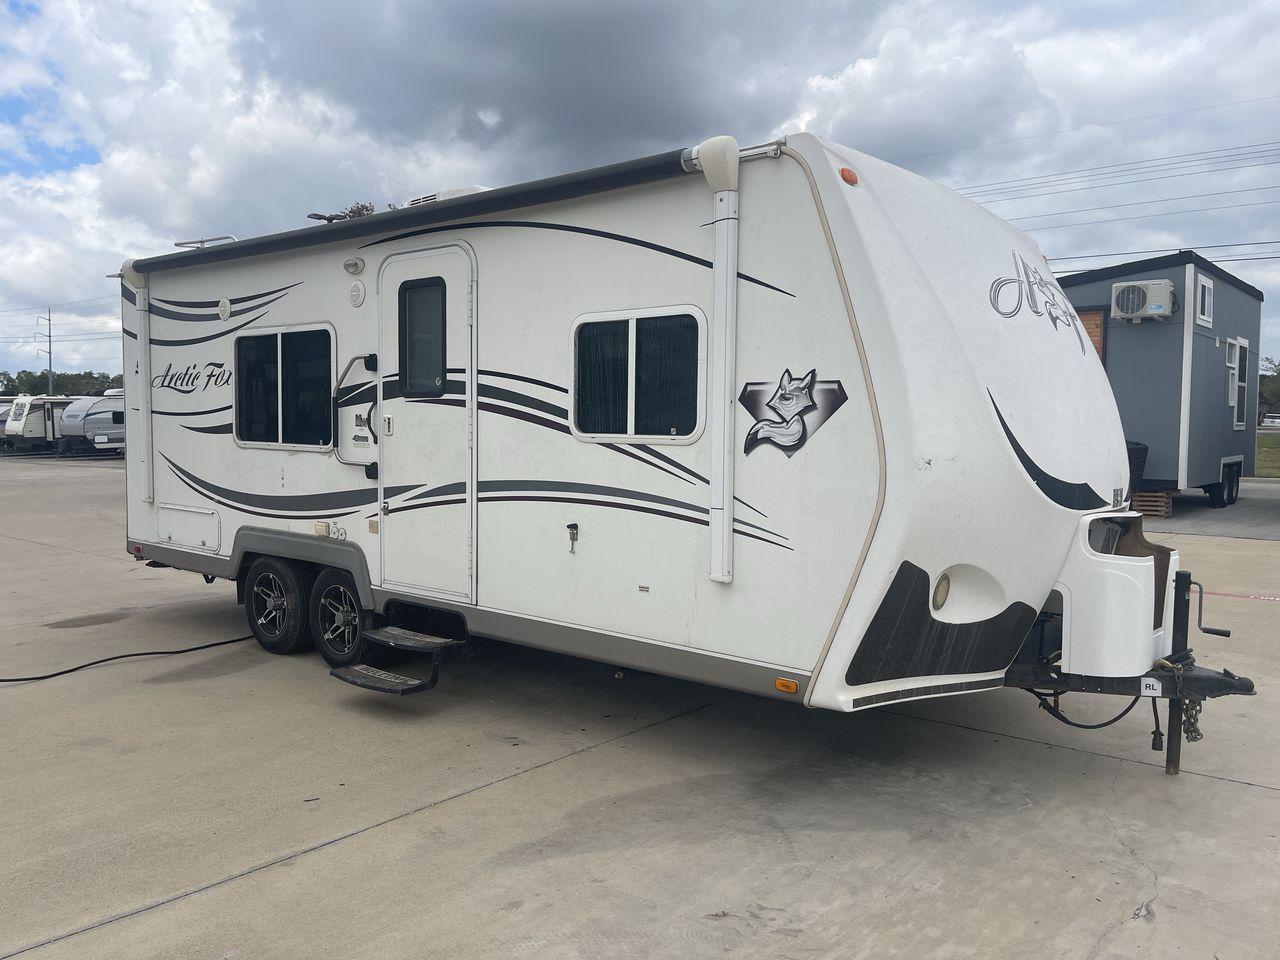 2012 WHITE NORTHWOOD ARCTIC FOX 22H (4N11H2223C0) , Length: 23 ft. | Dry Weight: 4,880 lbs. | Slides: 0 transmission, located at 4319 N Main St, Cleburne, TX, 76033, (817) 678-5133, 32.385960, -97.391212 - With the 2012 Northwood Arctic Fox 22H travel trailer, set out on outdoor adventures. This tough and fully functional RV is made to withstand a range of conditions and offer you comfort and convenience while traveling. The measurements of this unit are 23 ft in length by 8 ft in width. It has a d - Photo #20